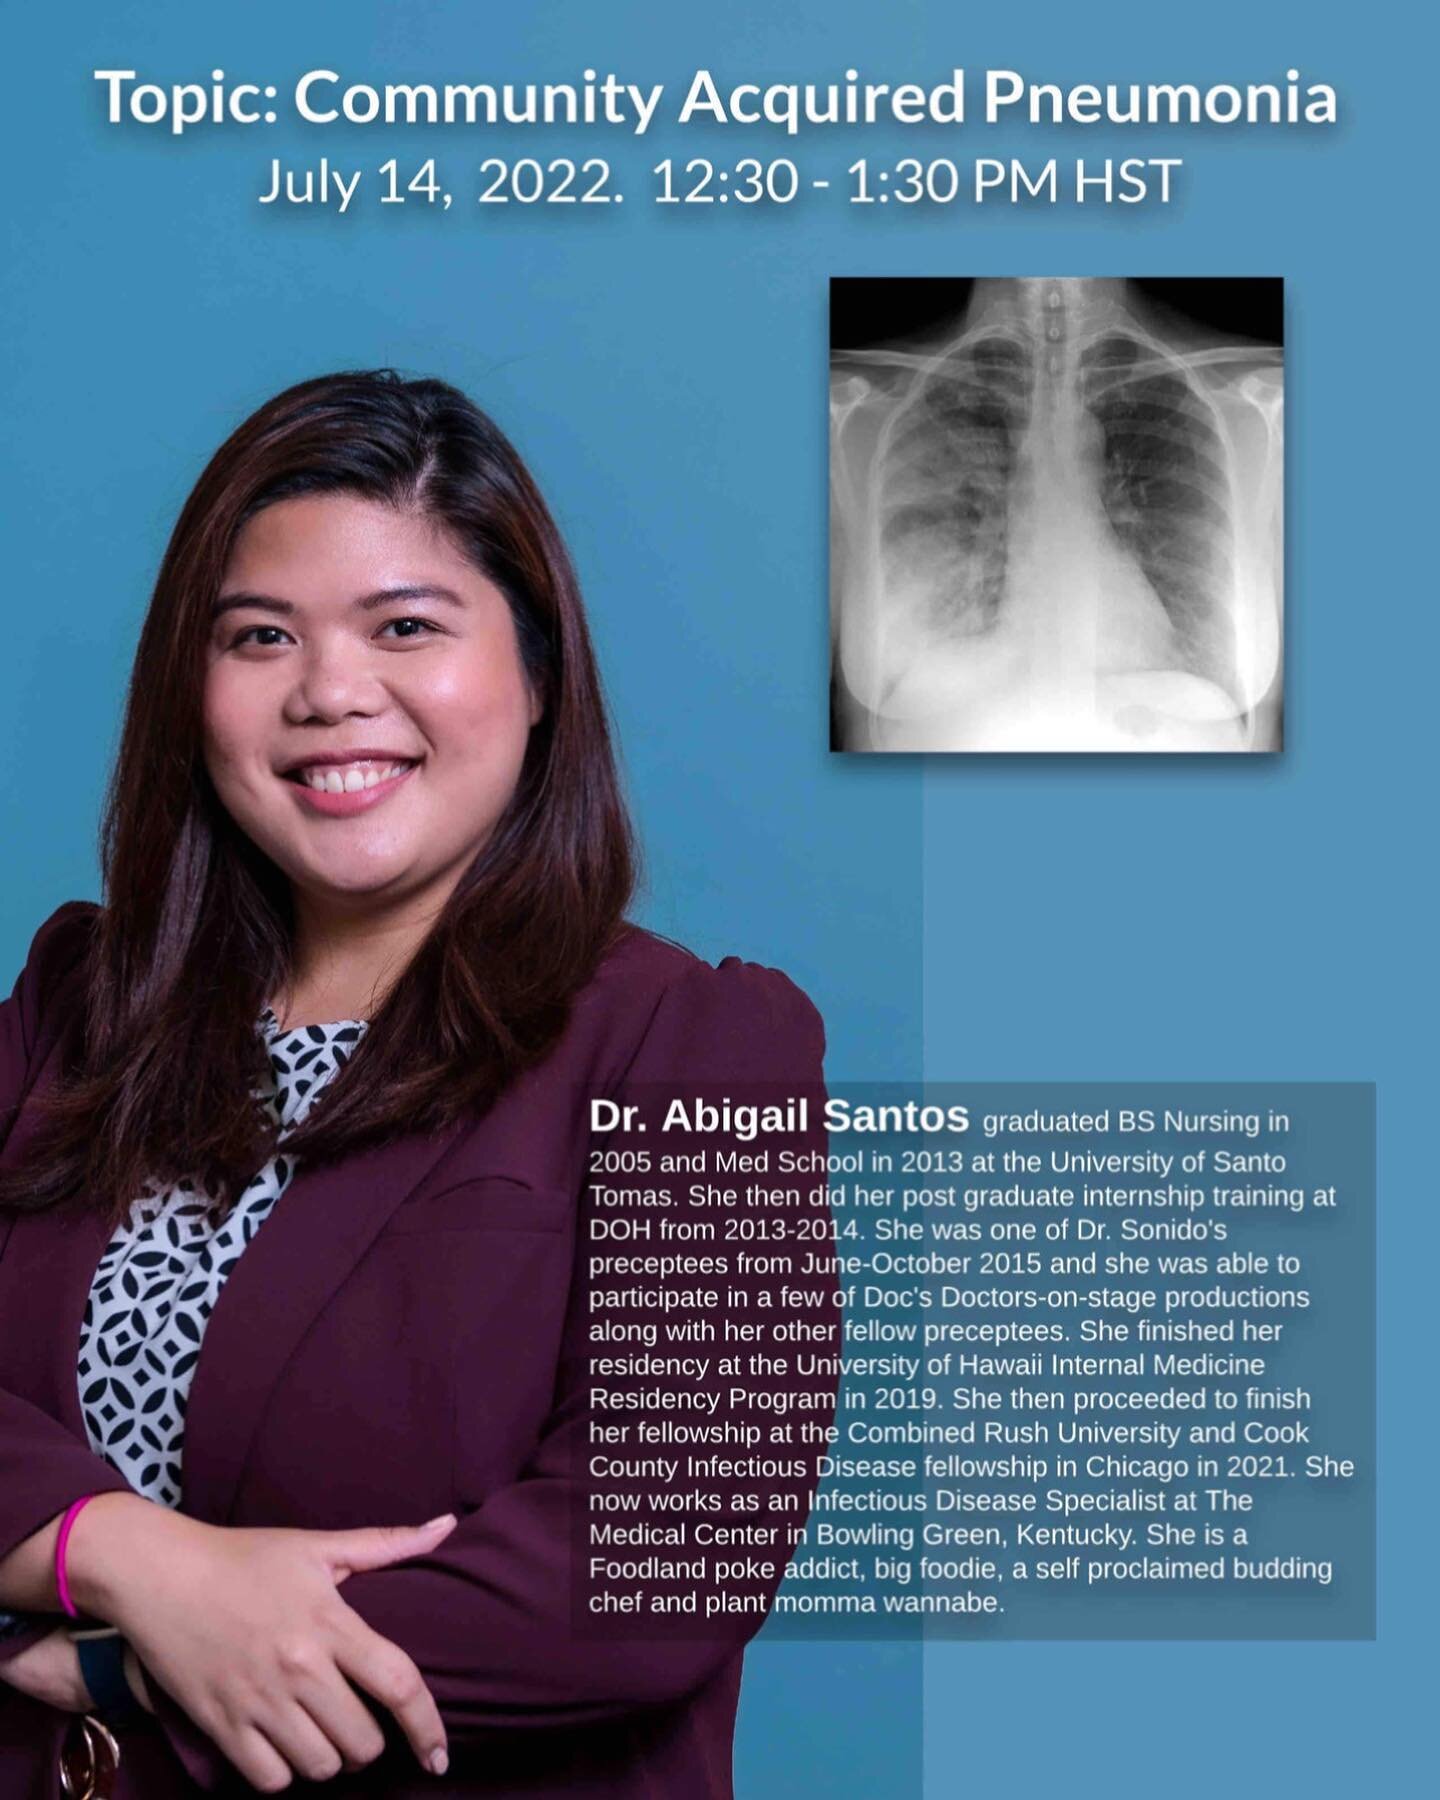 Excited for our lecture from one of our previous preceptees! Dr. Abigail Santos!!

These lectures are exclusive to our program.  To learn more and apply to our program check our website!

#preceptorship #usce #usresidency #medicalrotations #img #fmg 